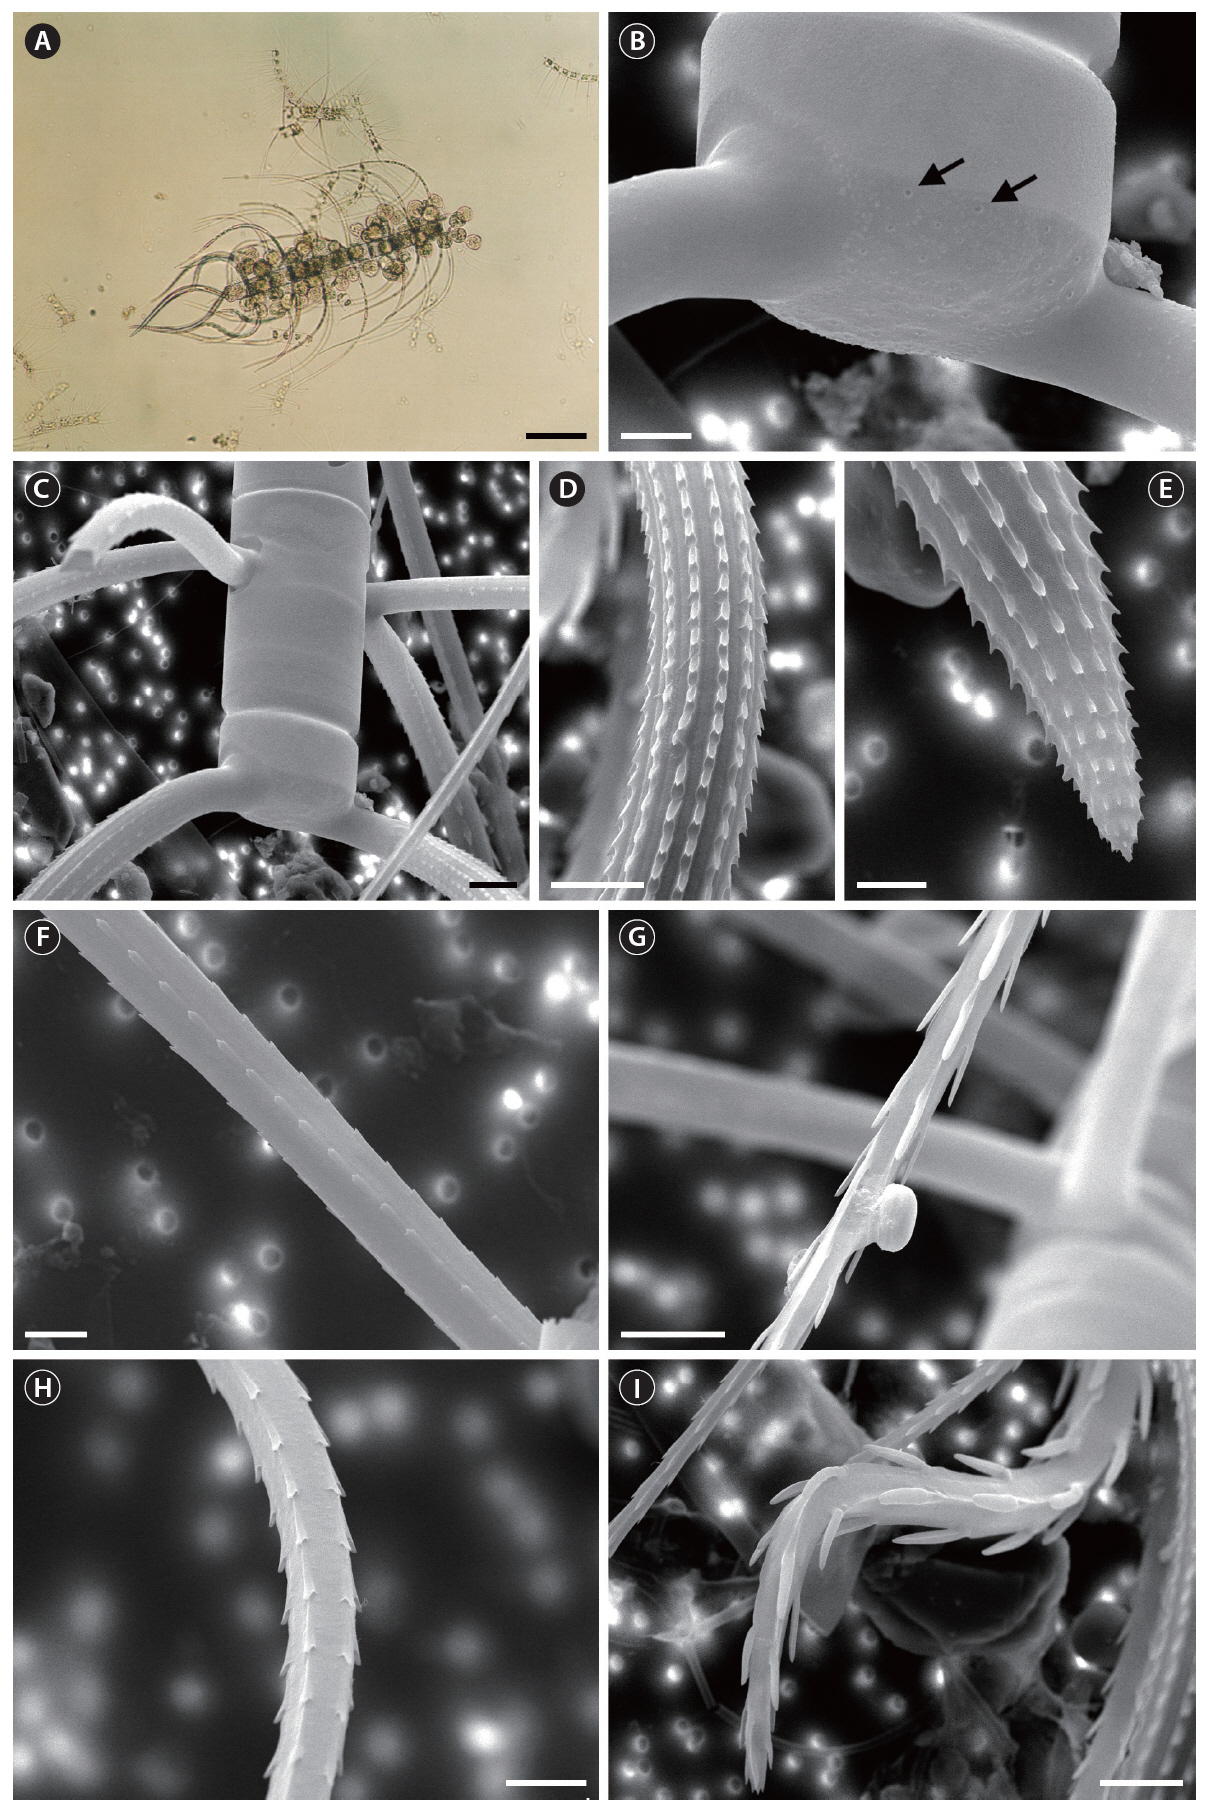 Chaetoceros coarctatus (A light microscope; B-I scanning electron microscope). (A) Part of a chain showing the terminal intercalary setae and attached species of Vorticella oceanica. (B) Posterior terminal valve with several rimoportula (arrows). (C) Part of a chain in broad girdle view absent foramina. (D) Middle part of terminal setae with very heavily silicified spines. (E) Tip of tapering terminal setae with robust spines. (F) Region of between original and middle part of common intercalary setae with weak spines. (G) Straight common intercalary setae with heavily spines. (H) Middle part of special intercalary setae with regular poroids and spines. (I) Heavily curved special intercalary setae with very robust spines. Scale bars represent: A 100 ㎛; B E F & H 5 ㎛; C D G & I 10 ㎛.